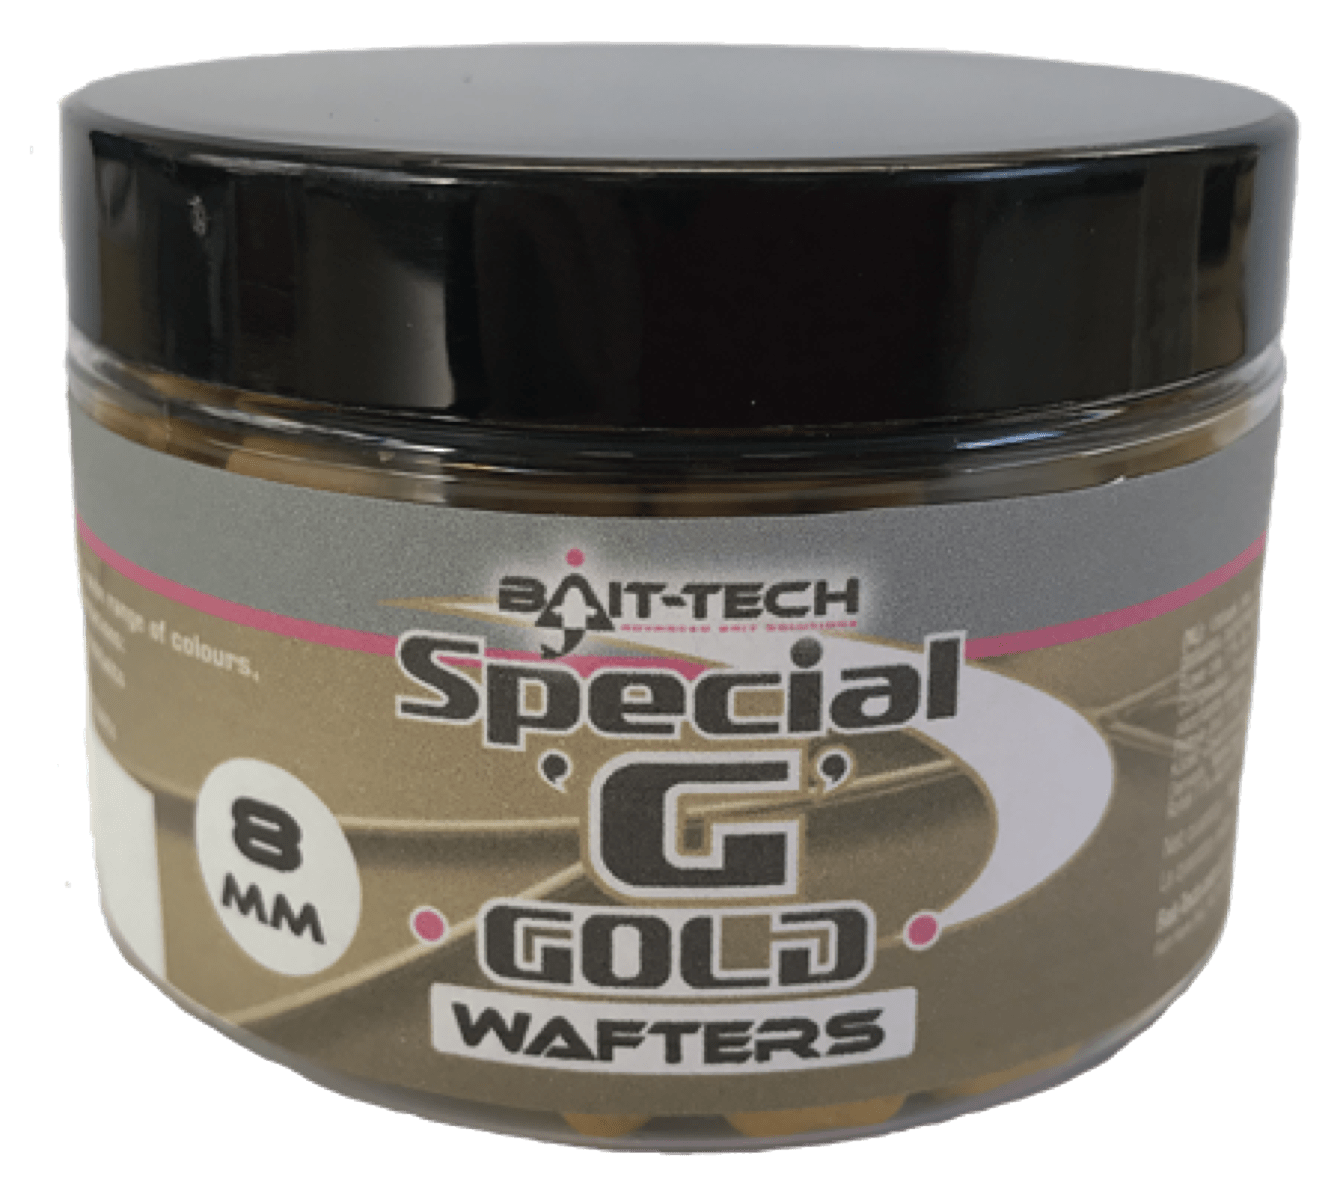 Bait-Tech special G dumbell wafters 8mm gold